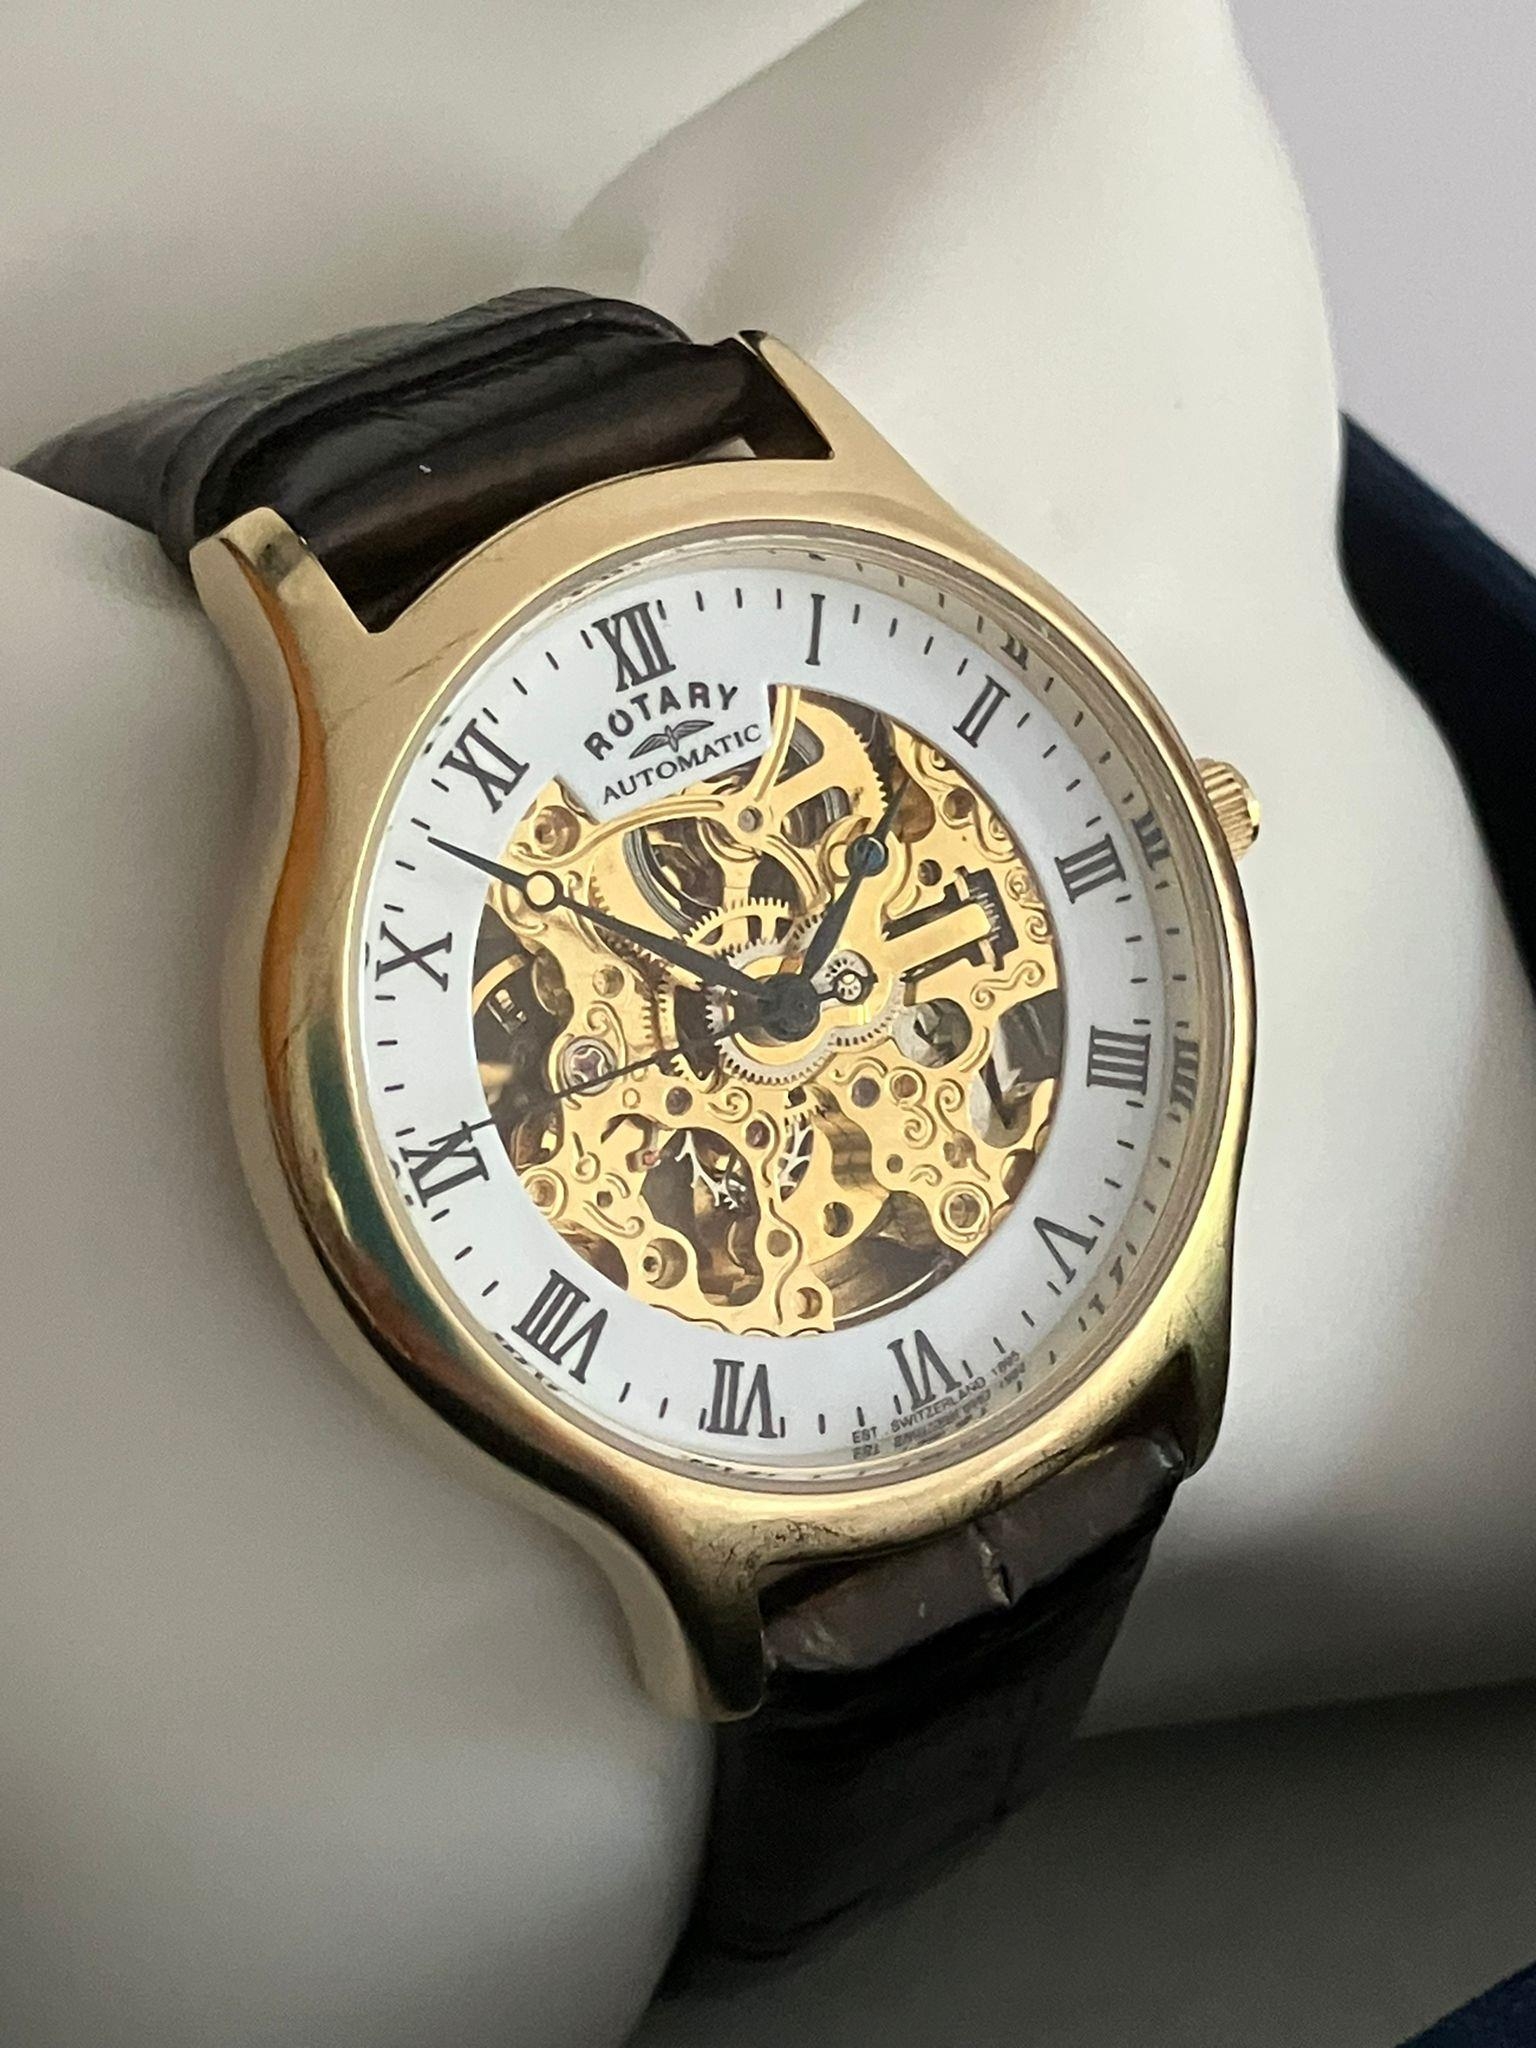 Gentlemans ROTARY AUTOMATIC SKELETON WRISTWATCH. Finished in gold tone with leather strap. - Image 8 of 9